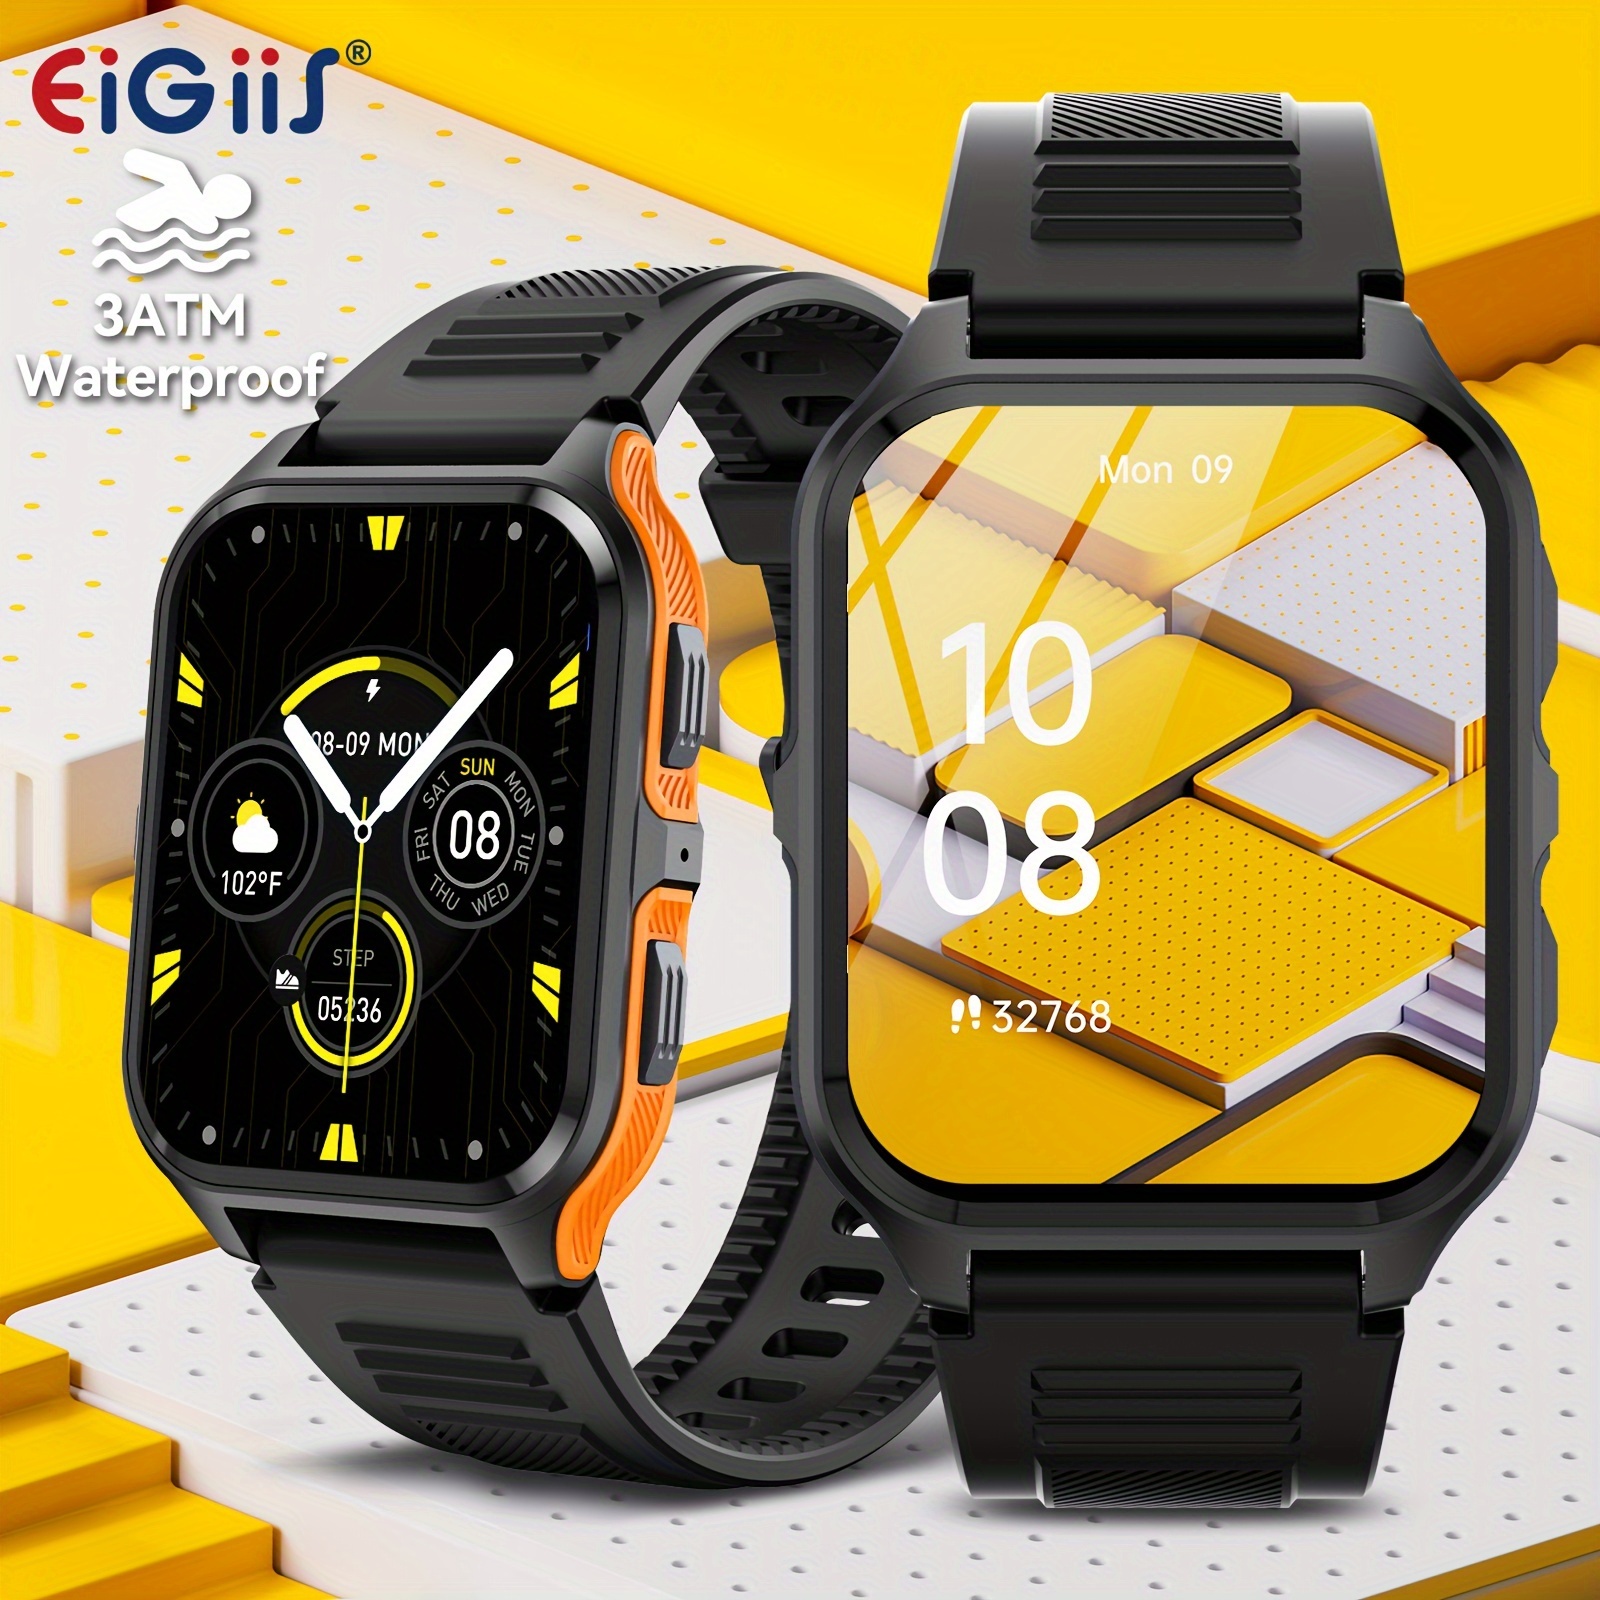 Xiaomi Redmi Watch 2 Lite, 1.55 Colorful Touch Display, 100+ Fitness  Modes, 5 ATM Water Resistance, SPO2 Measurement, 24-Hour Heart Rate  Tracking